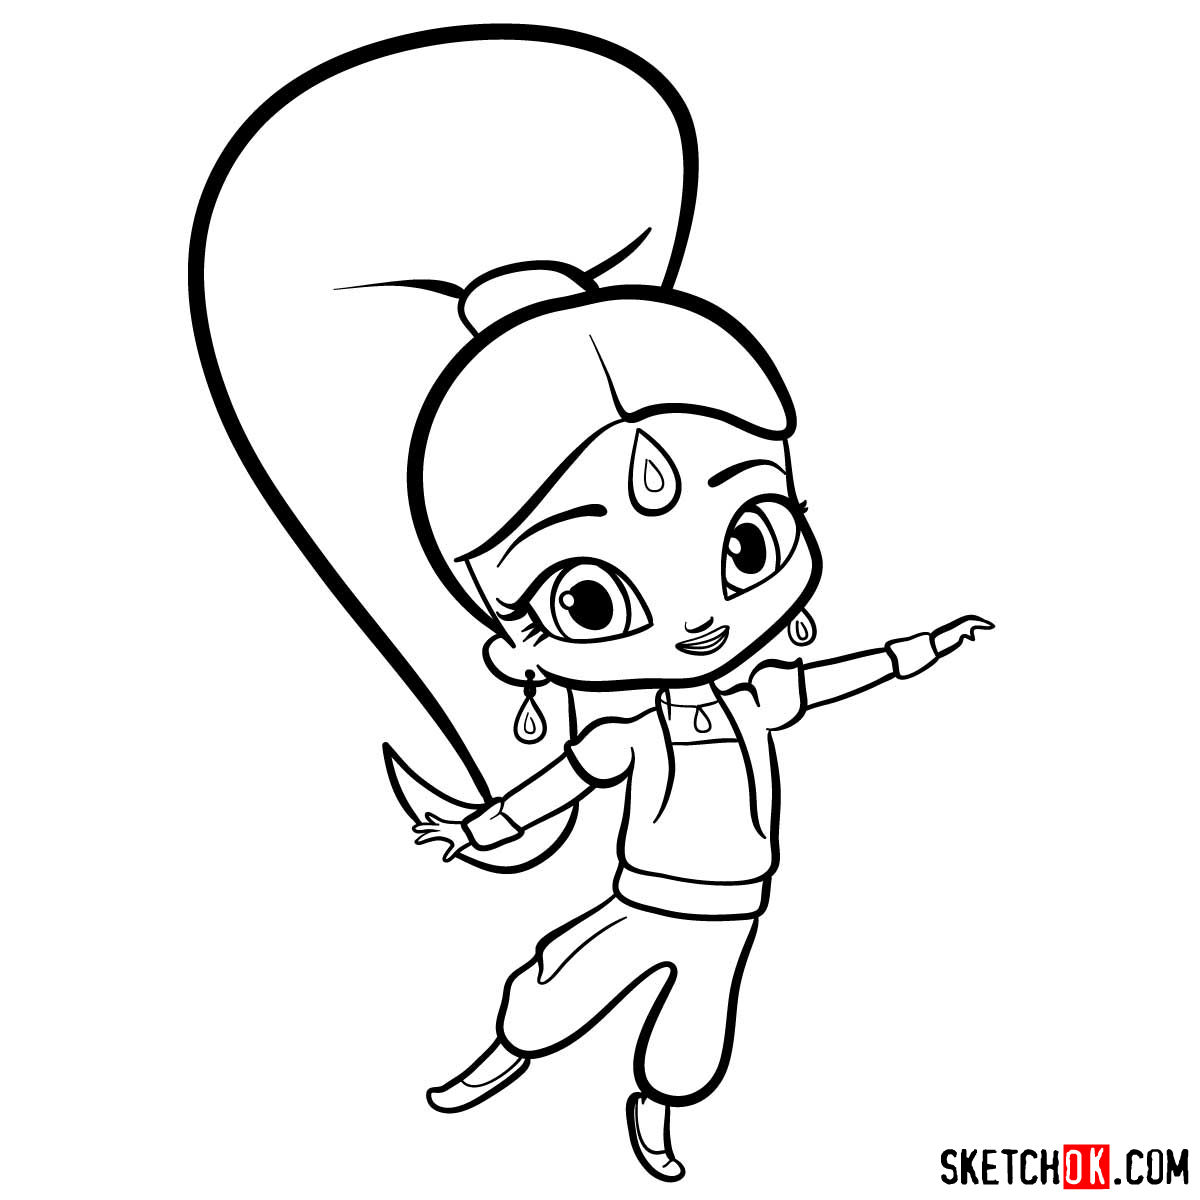 Bringing Genies to Life: How to Draw Shimmer the Genie